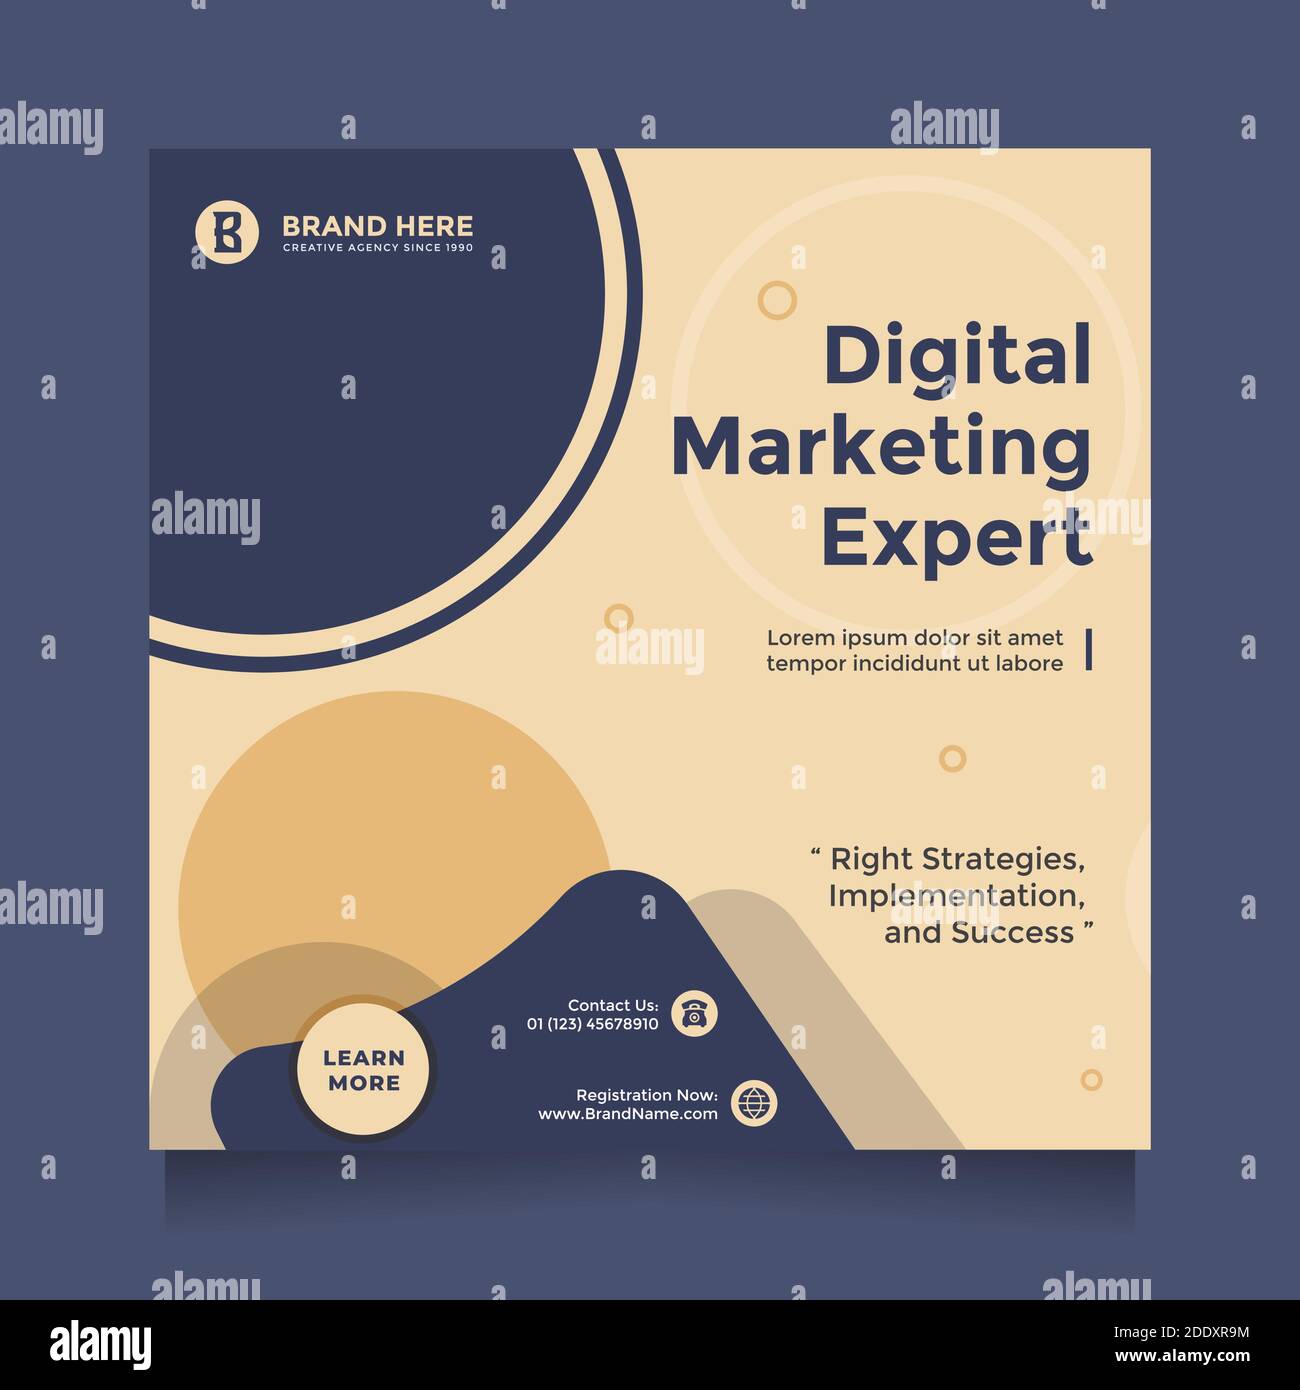 How to use your free time to become a digital marketing expert? - Curvearro